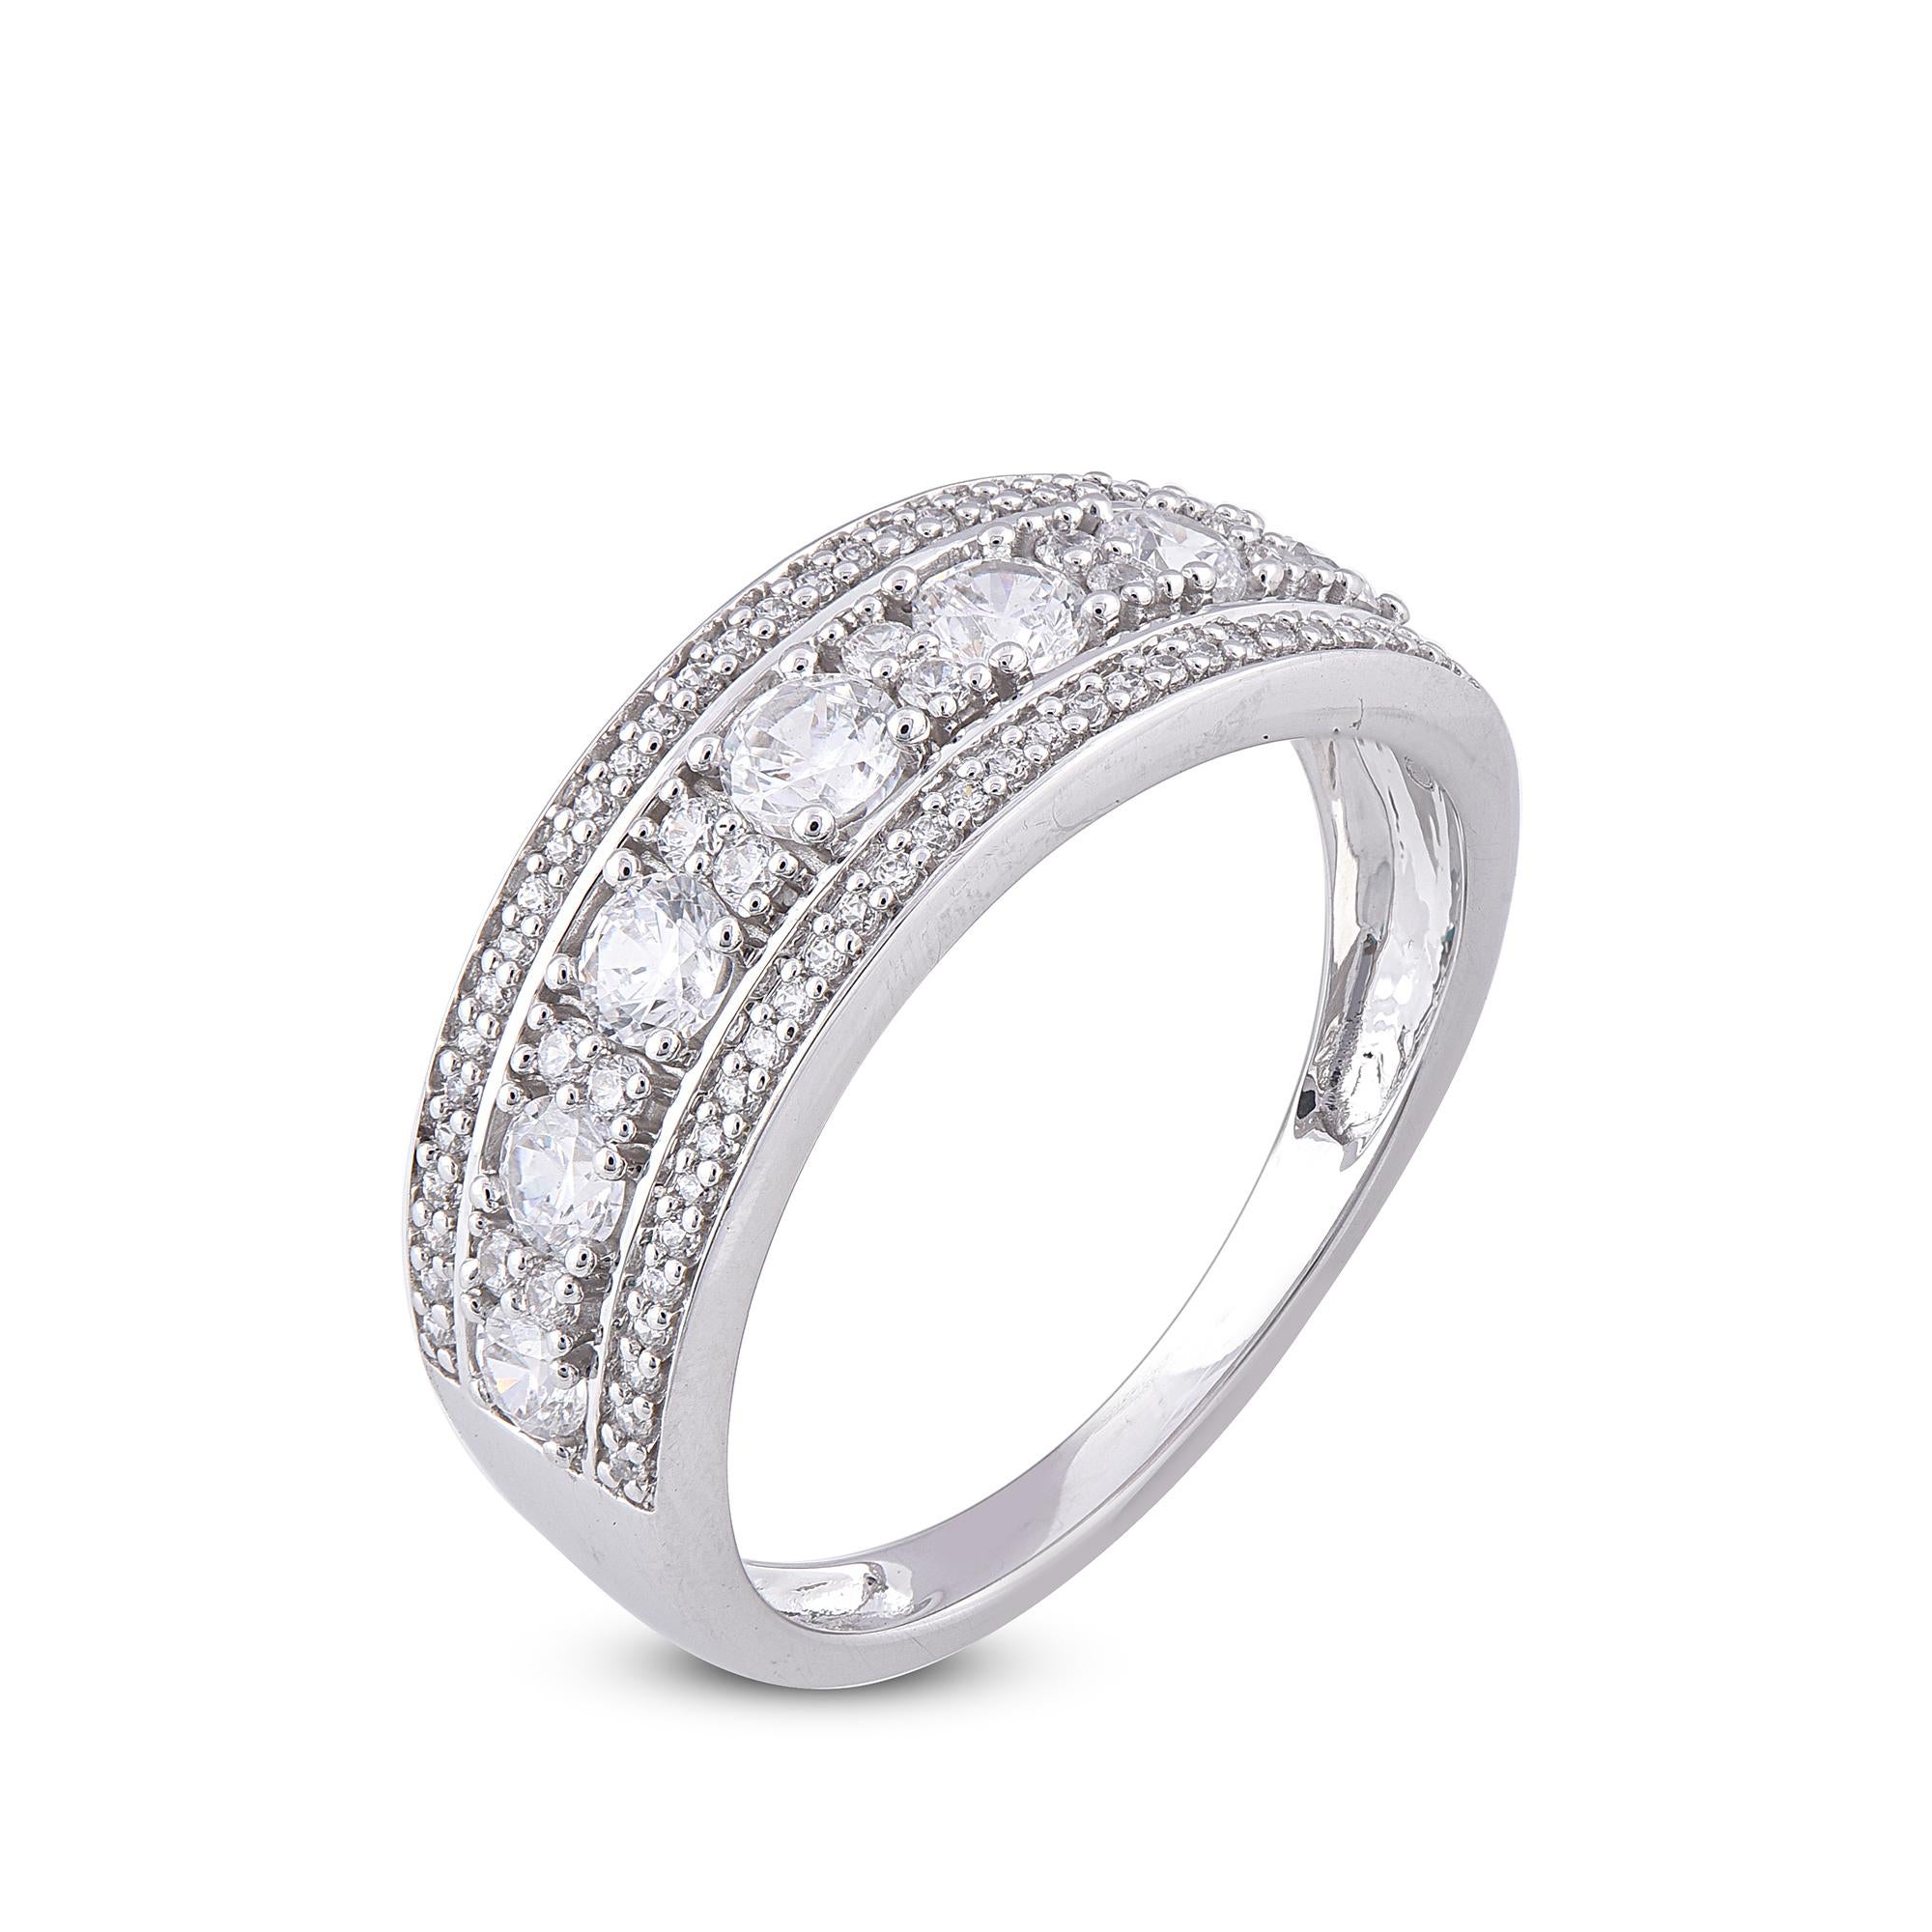 Round Natural Diamond Wedding Band Ring adds a touch to sophistication to your style with this 14 Karat White Gold. This ring features 77 Round White Diamonds set in prong and pave setting a beautiful design forming a unique pattern. This ring has